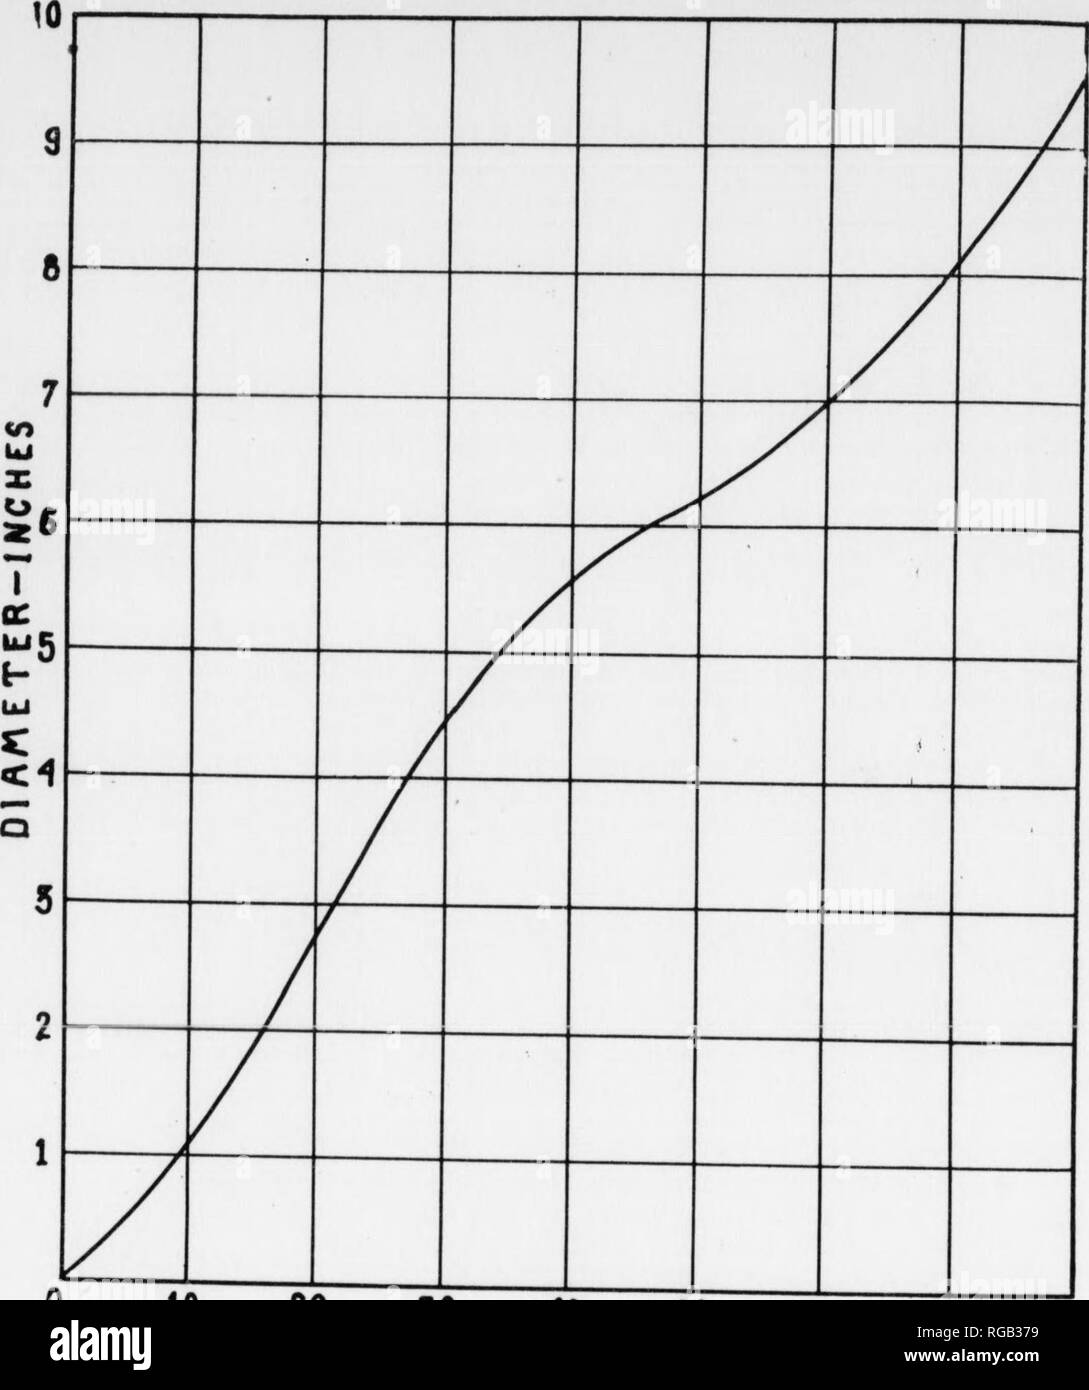 . Bulletin (Pennsylvania Department of Forests and Waters), no. 46-50. Forests and forestry. ]G The Beecii-JjIuch-Maple Forest Type in Pennsylvania. 10 20 50 -10 50 /GE-YE^RS 60 70 BO FtV/. .5. Diagram Showing Average Biamcier Growth of Beech-Birch-ManJe nJ!f l ^? J'^Z Pennsylvania at Different Ages up to 80 Years. Based Upon 18 Study Plots. The diameter growth appears to continue and often increases somewliat, holdinp: its own for many years after the period of maximum height growtli is passed. As soon as a retardation of growth is manifest in pure birch stands, heart rot begins to develop  Stock Photo